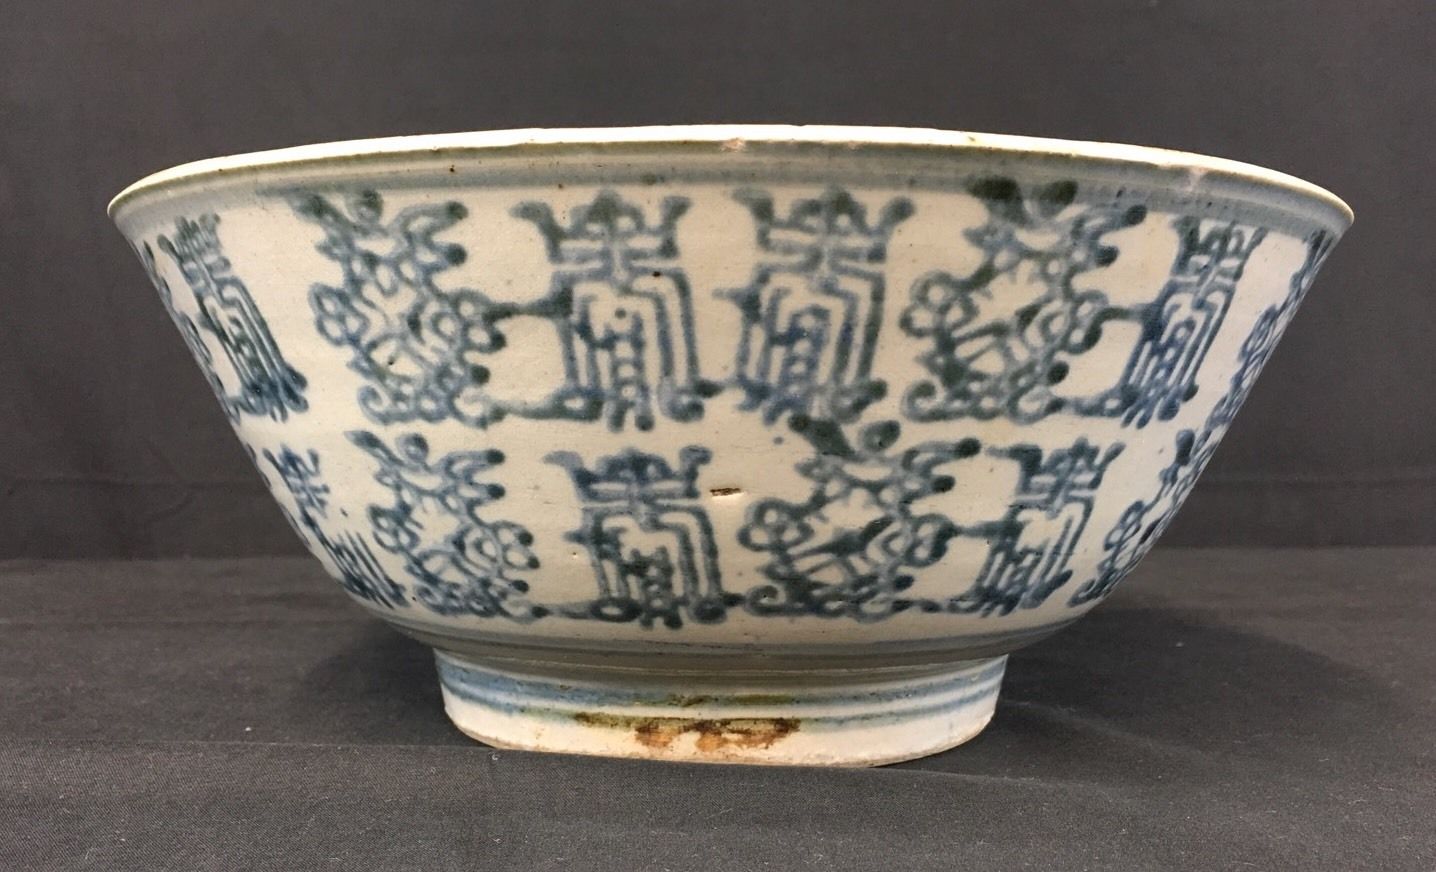 Very Rare Antique Chinese Porcelain Bowl Possibly Ming Dynasty Fine Quality